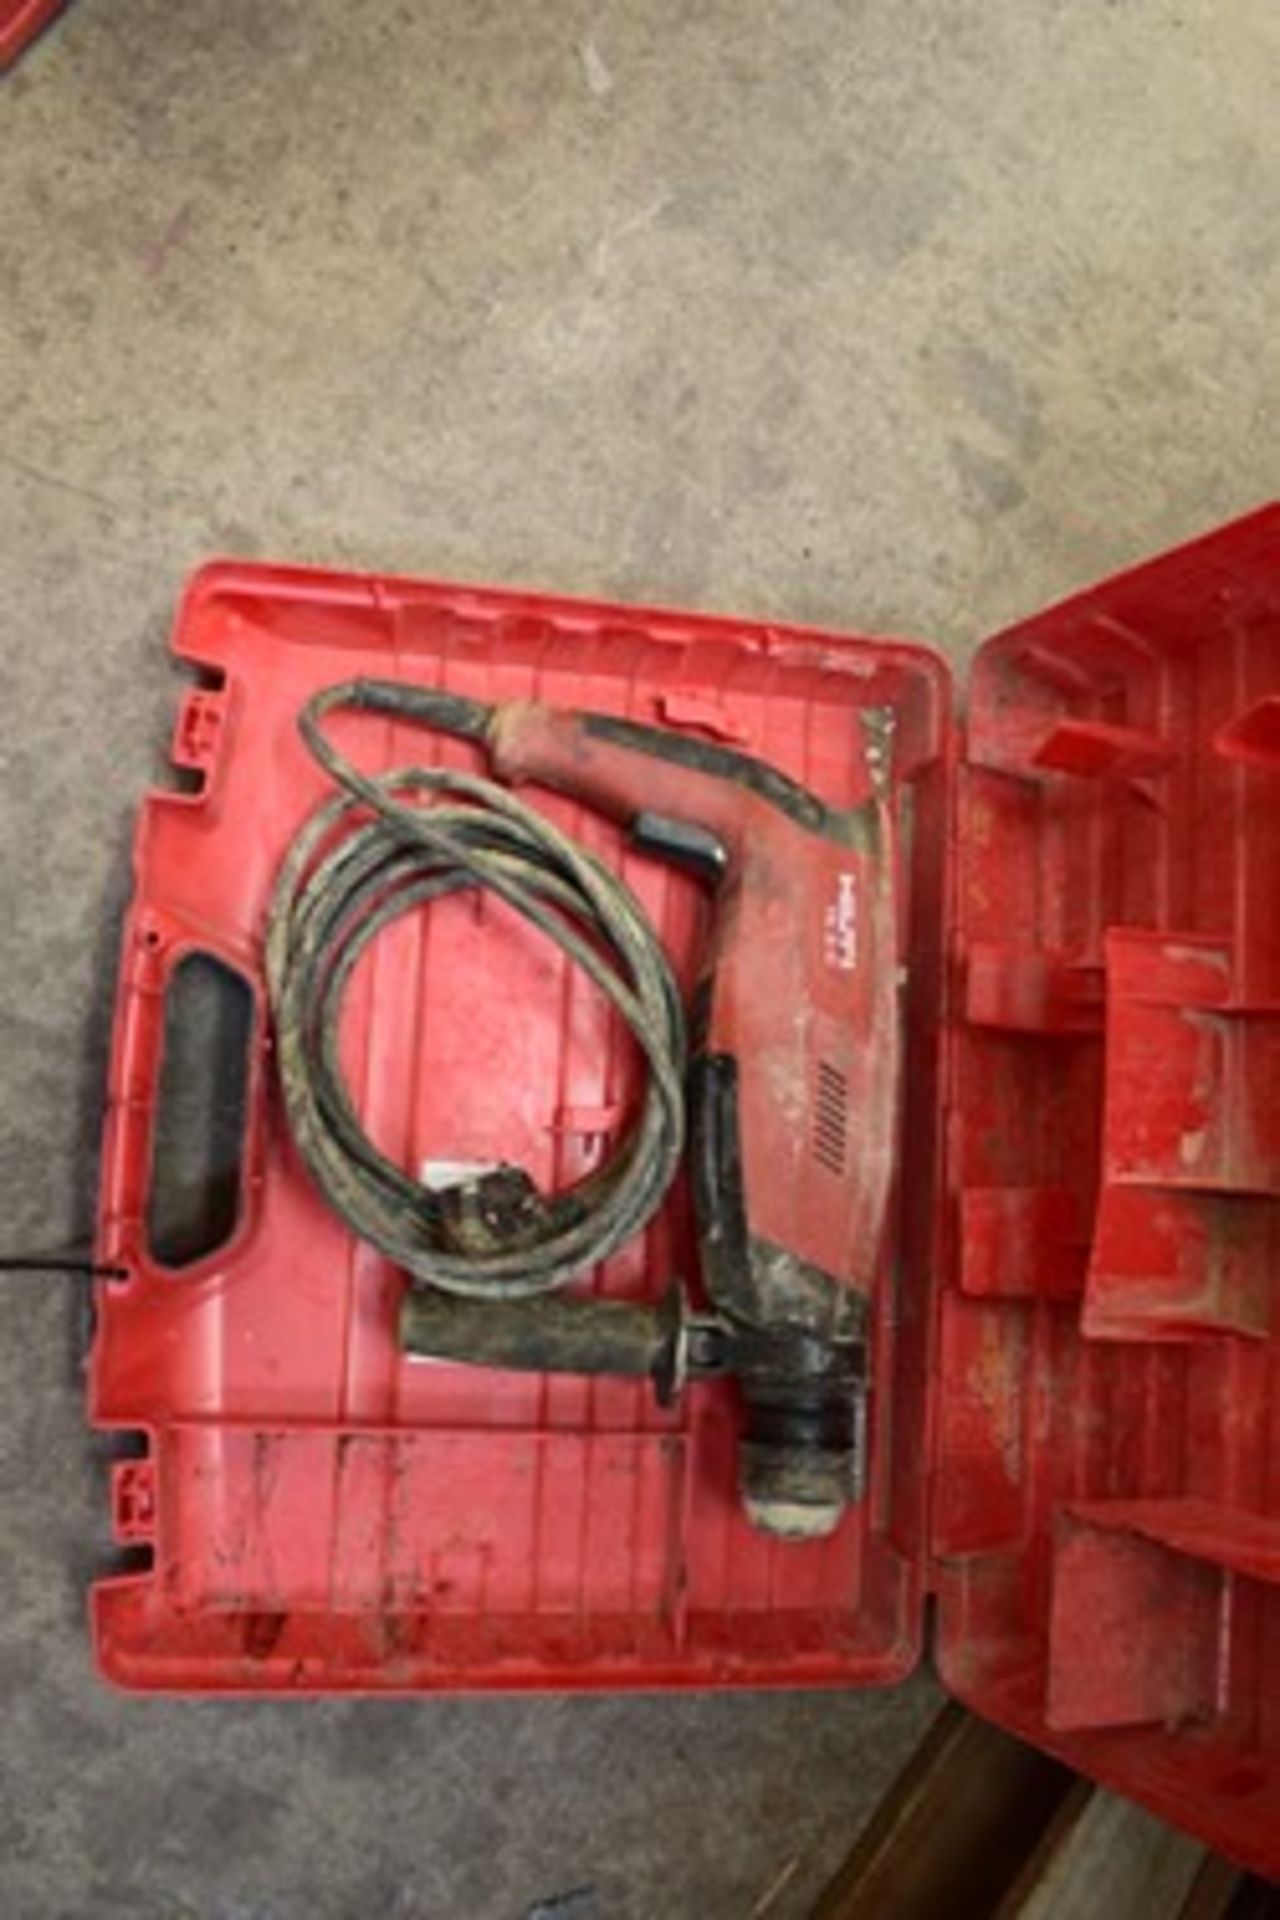 1 x Hilti TE 3C electric pistol drill, 240v 850w in original red carry case - second-hand (SW) - Image 2 of 2